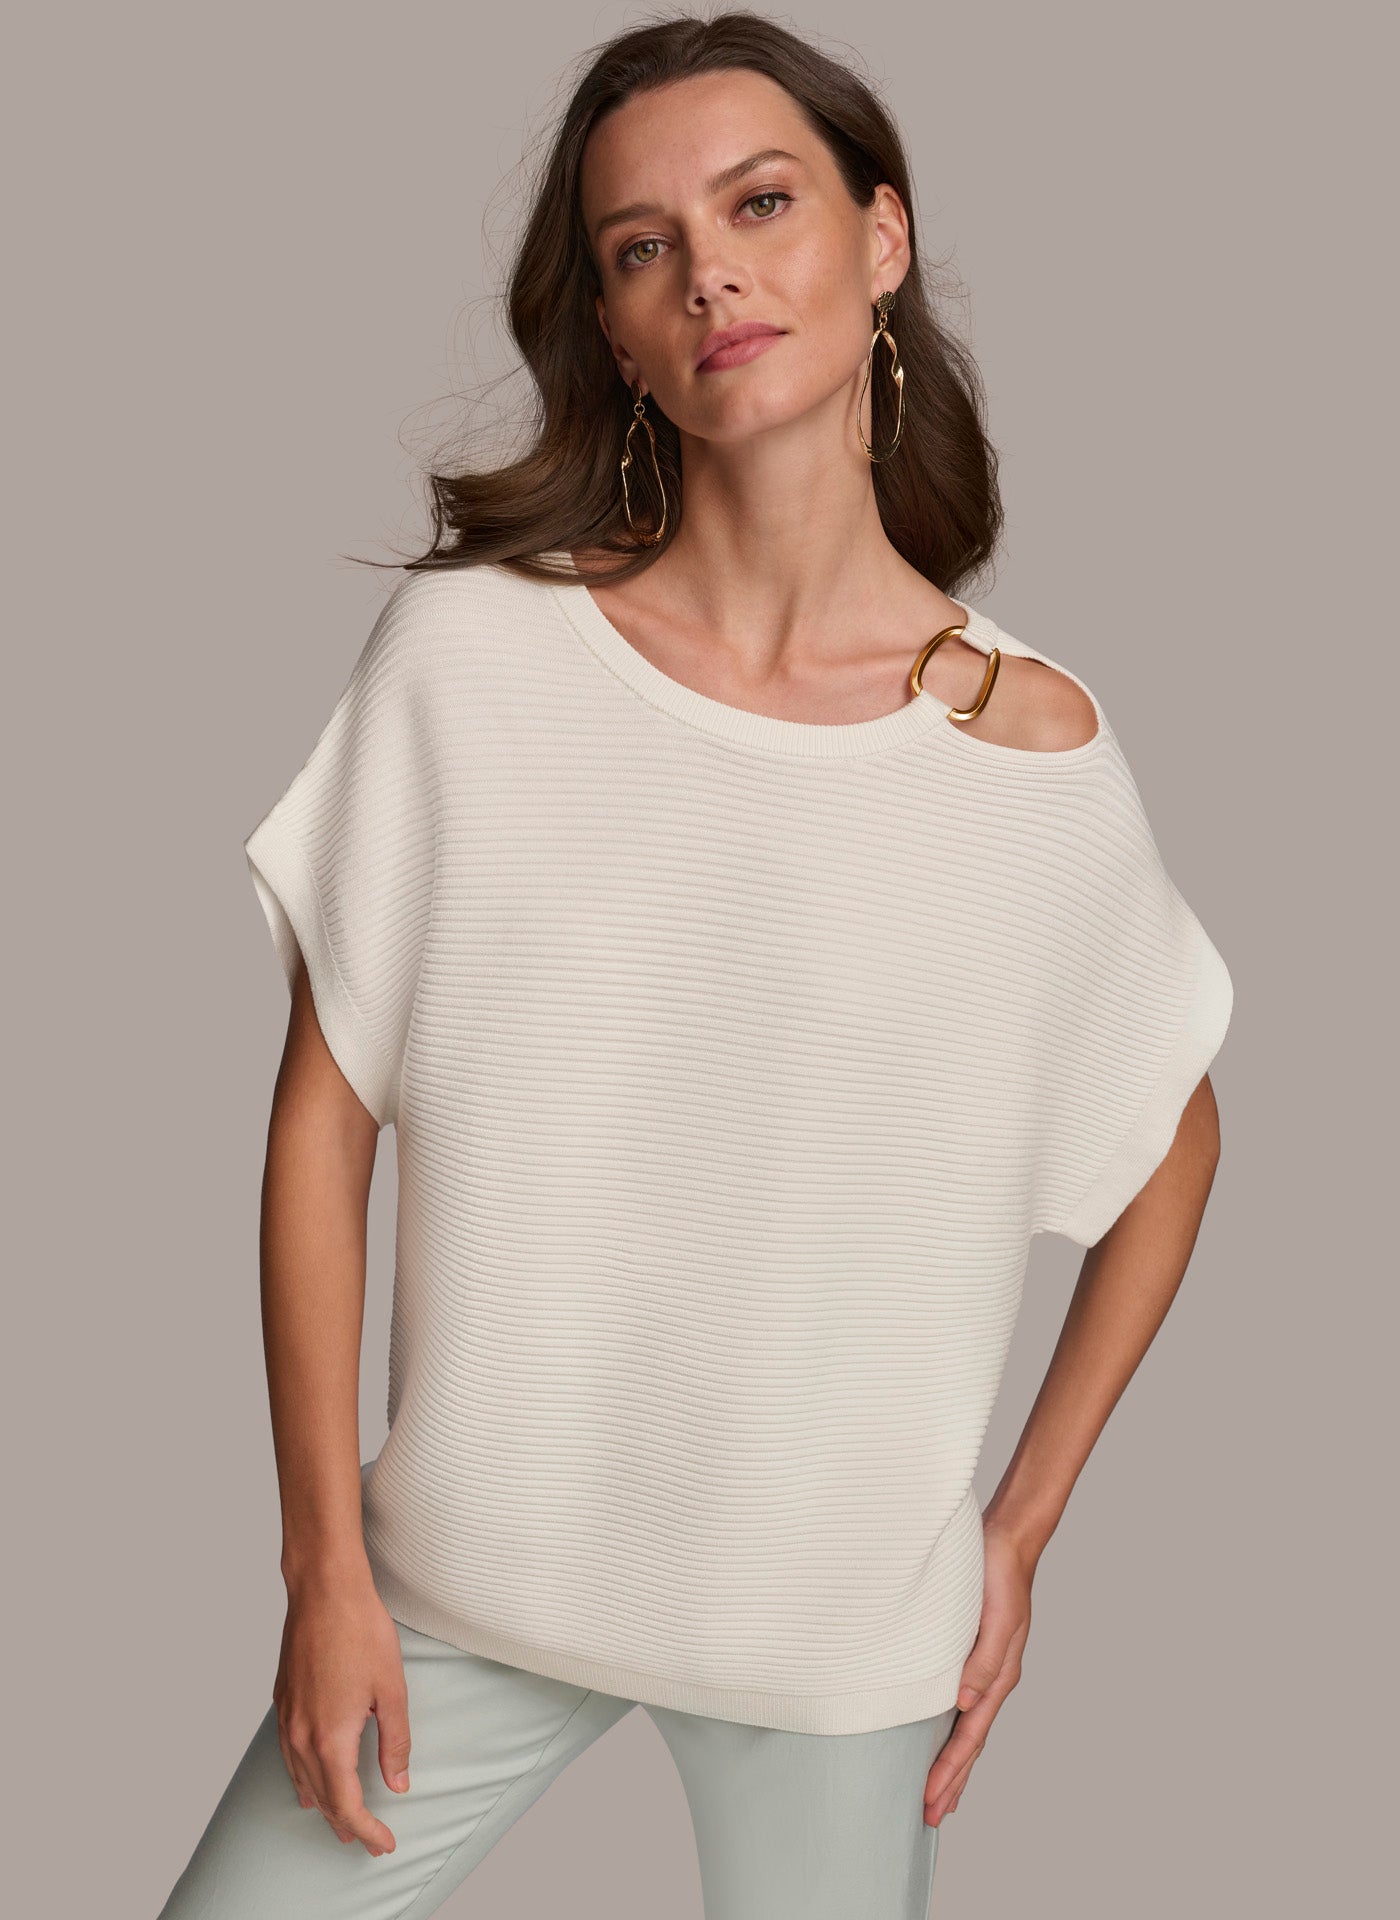 DOLMAN TOP WITH HARDWARE